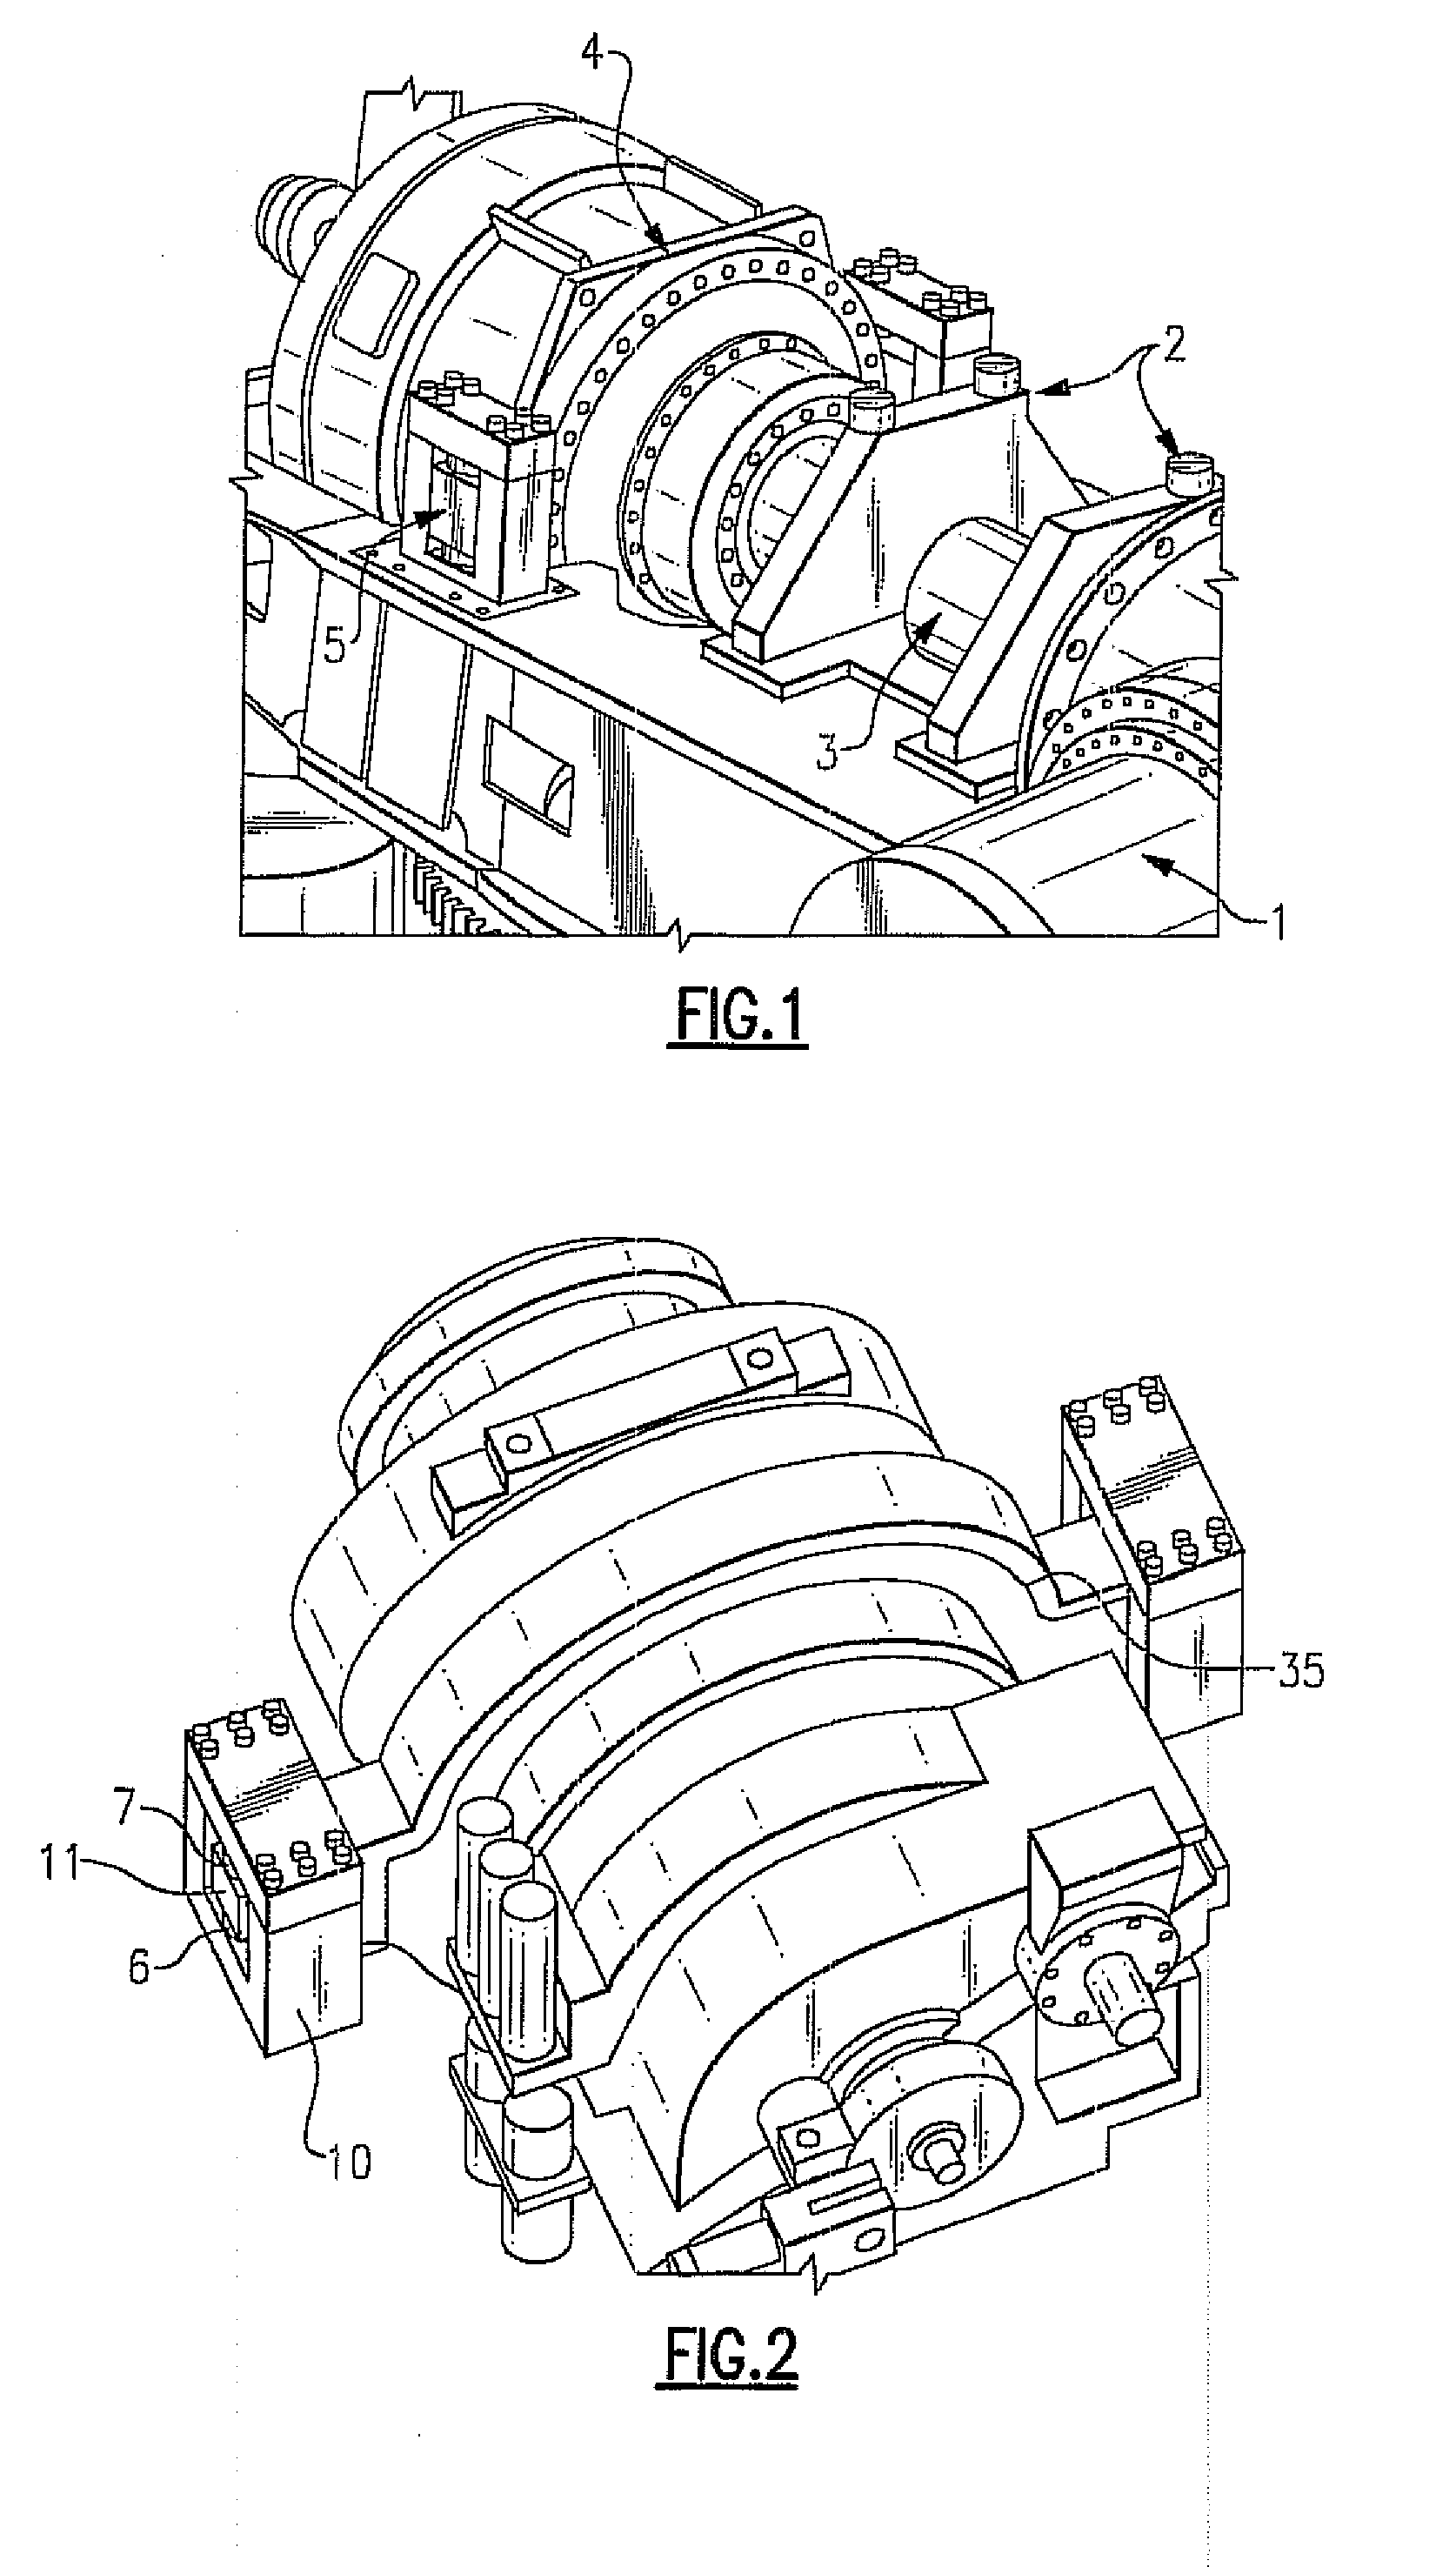 Hydraulically prestressed elastomer spring element and the use thereof in wind turbine bearings